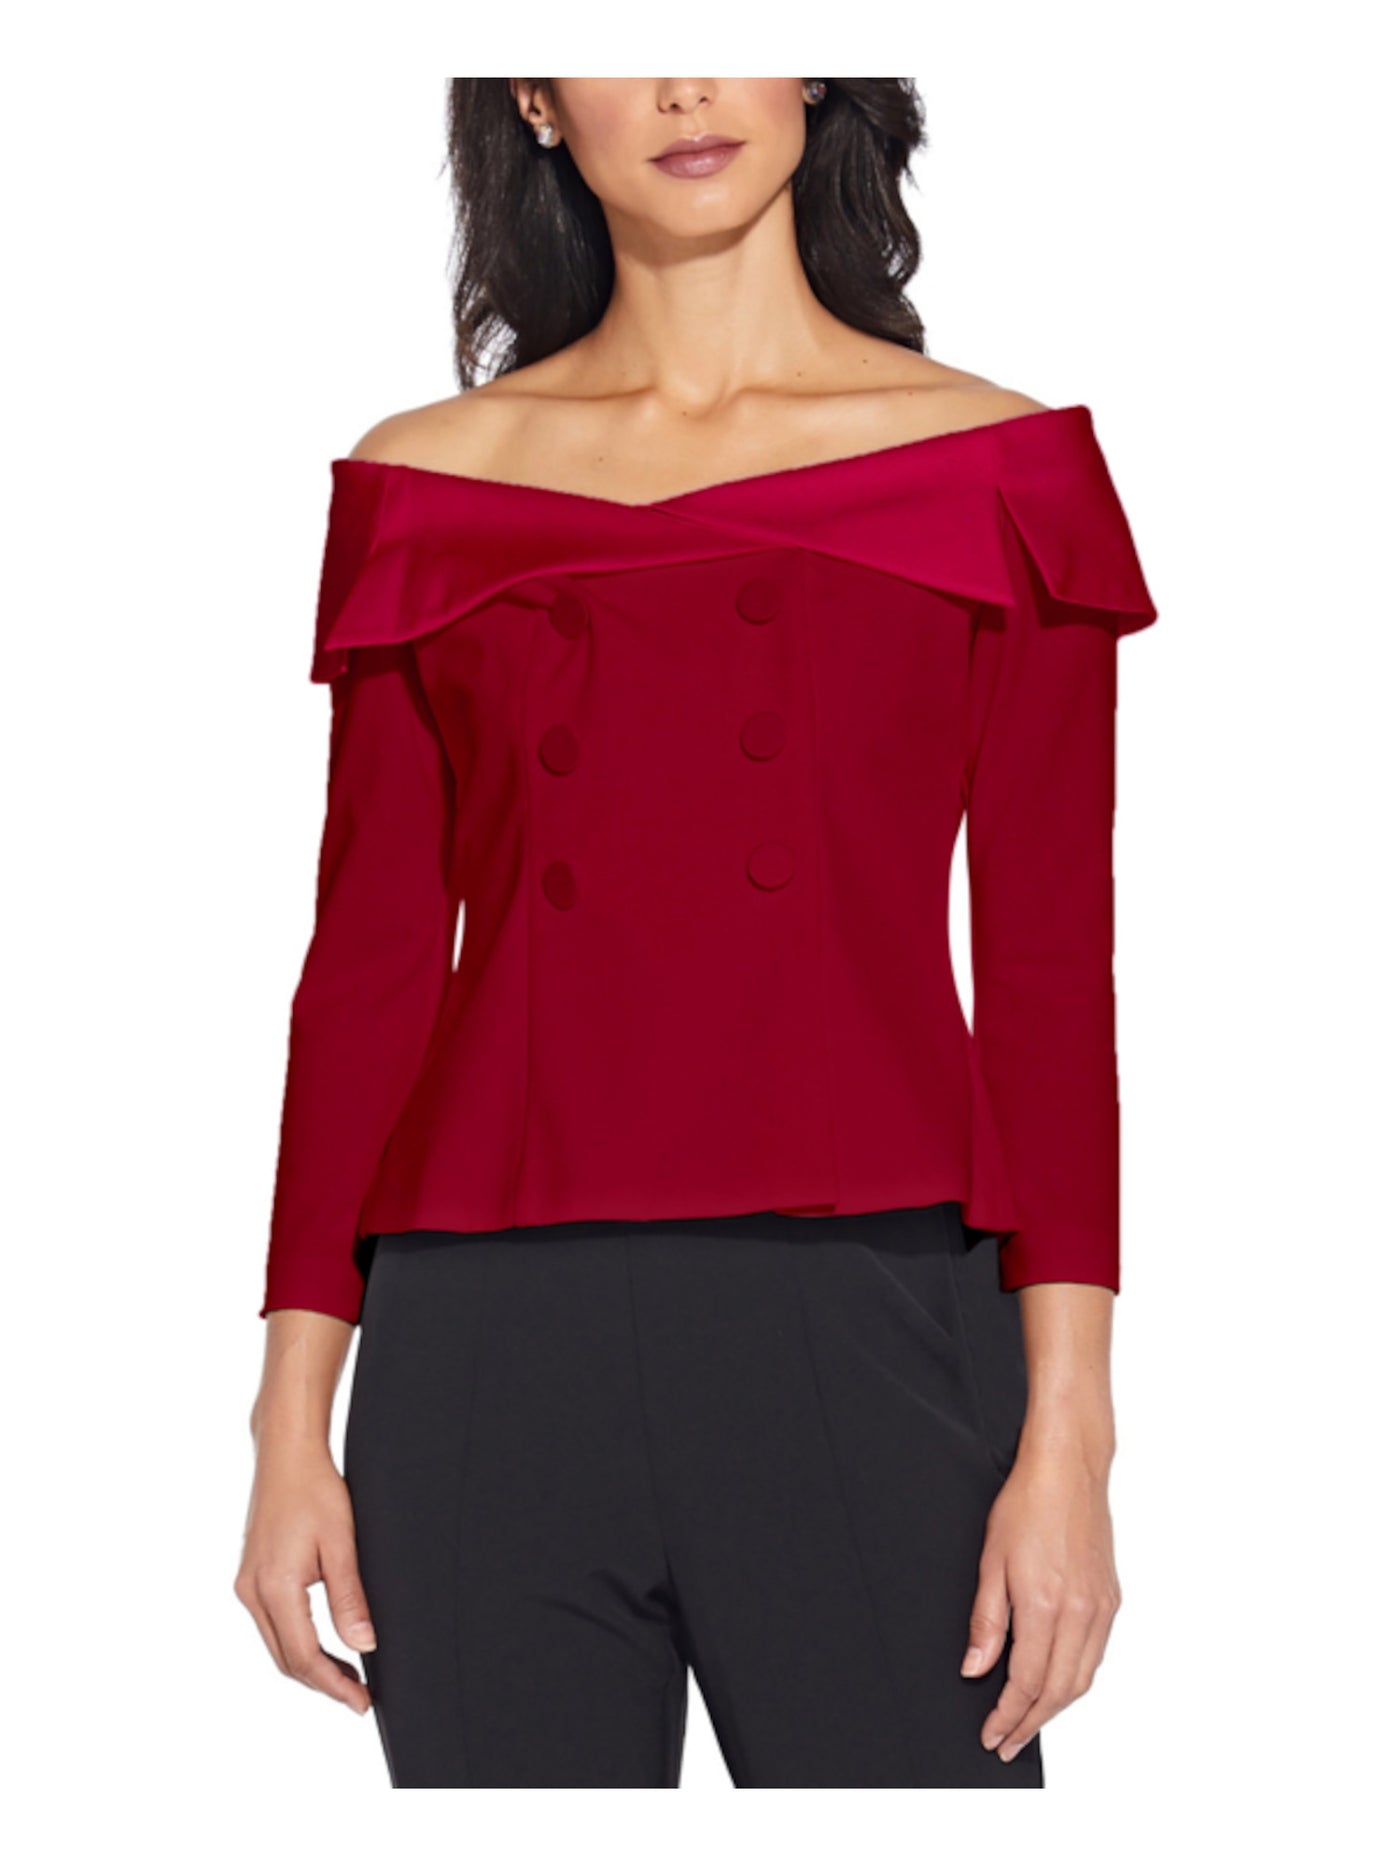 ADRIANNA PAPELL Womens Red 3/4 Sleeve Off Shoulder Wear To Work Top 4